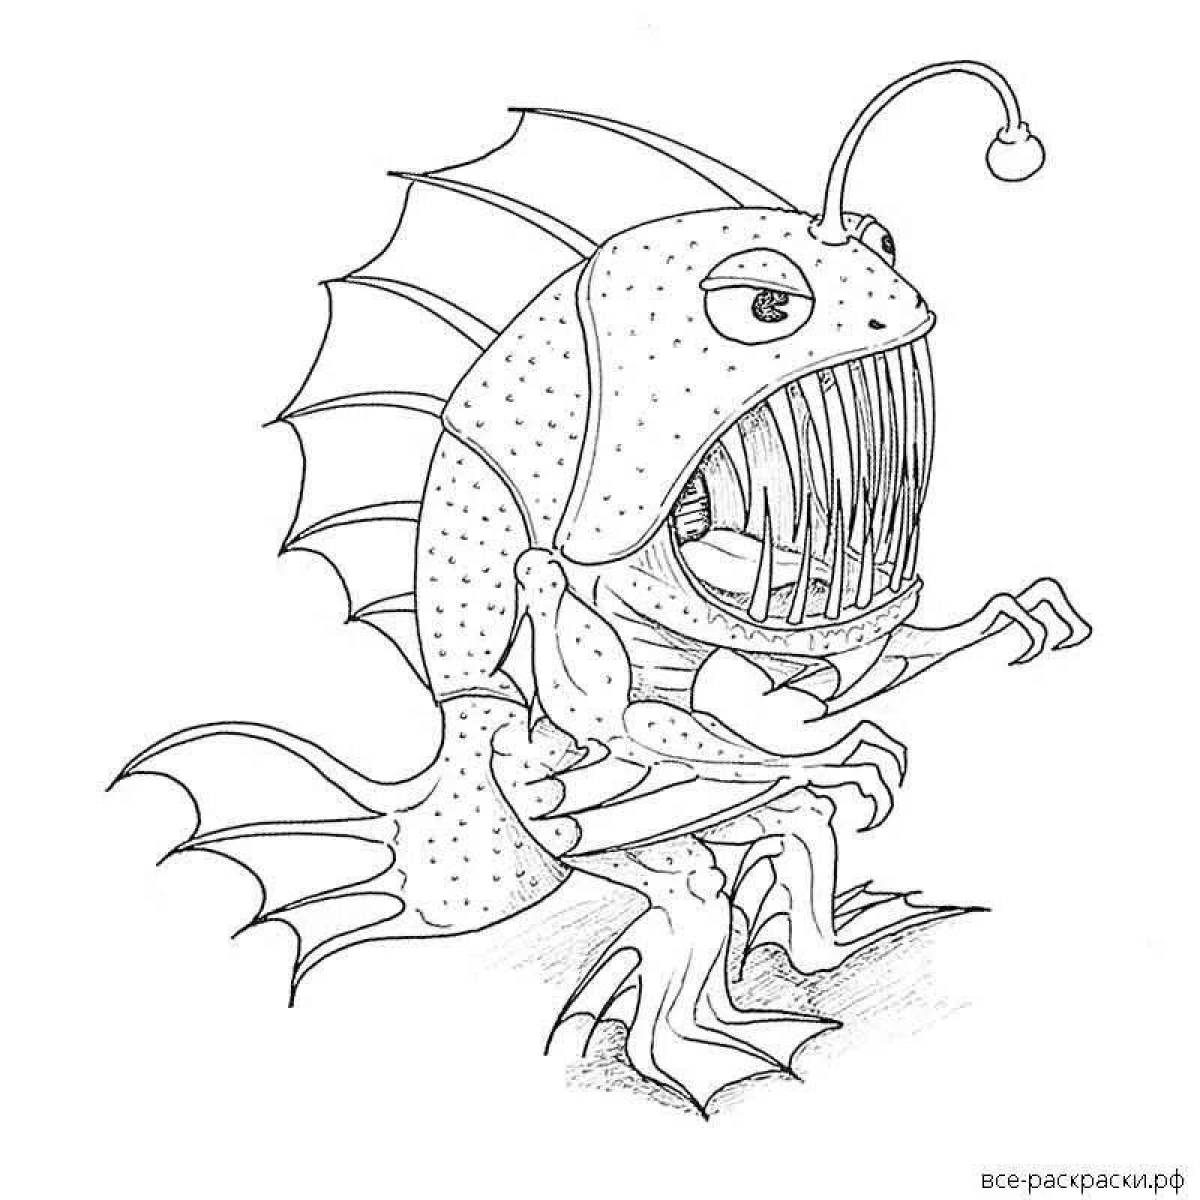 Sinister monster with siren head coloring book